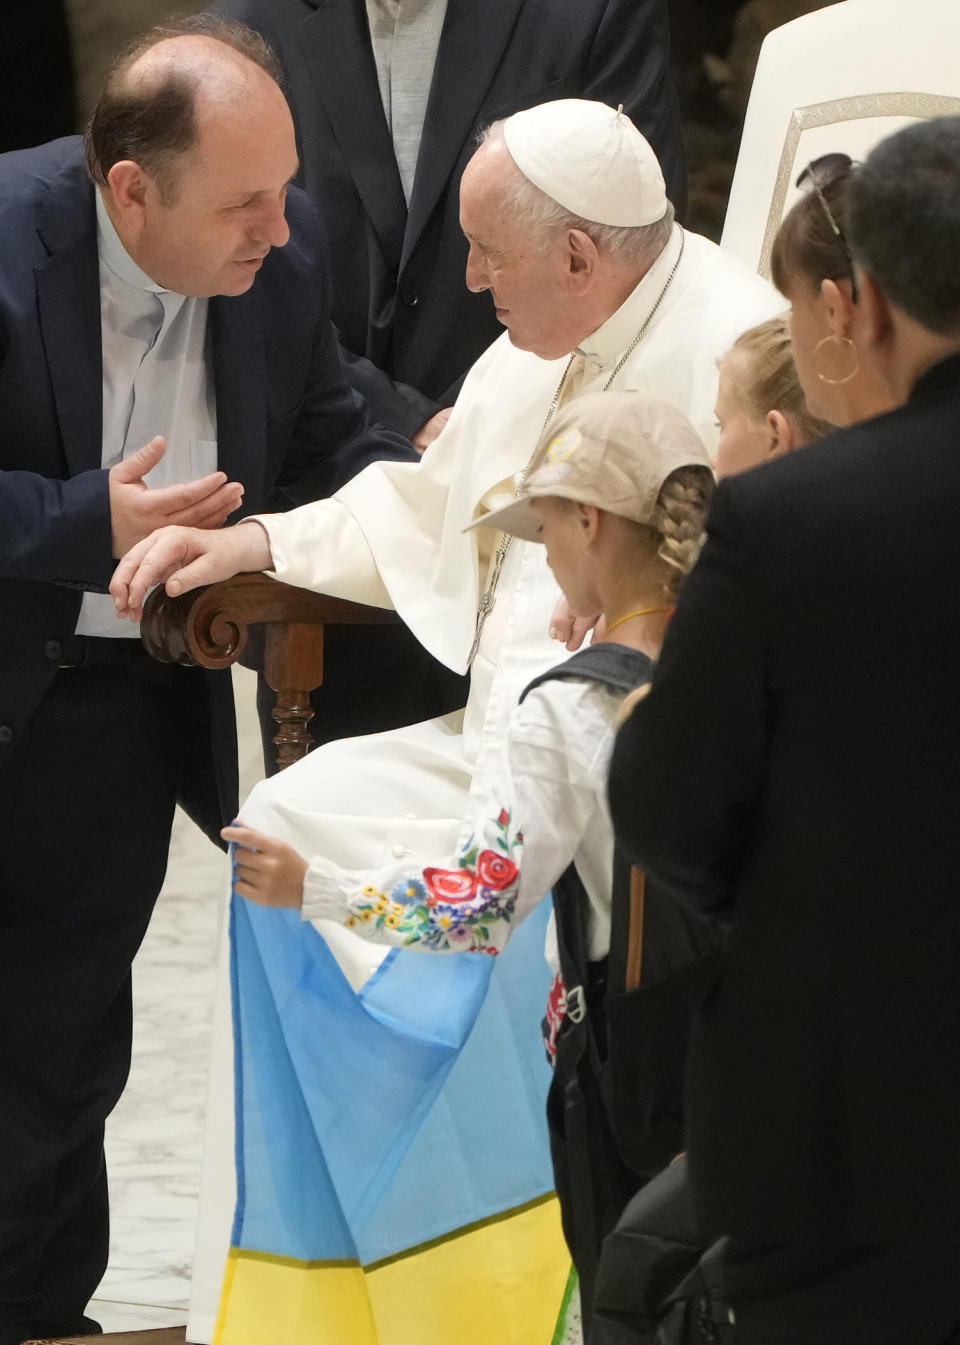 Children bring an Ukrainian national flag to Pope Francis during his weekly general audience in the Paul VI Hall at The Vatican, Wednesday, Aug. 24, 2022. Pope Francis marked the sixth month start of Russia's invasion of Ukraine on Wednesday by denouncing the "insanity" of war, warning against the risk of nuclear "disaster" and lamenting that innocents on both sides were paying the price. (AP Photo/Gregorio Borgia)